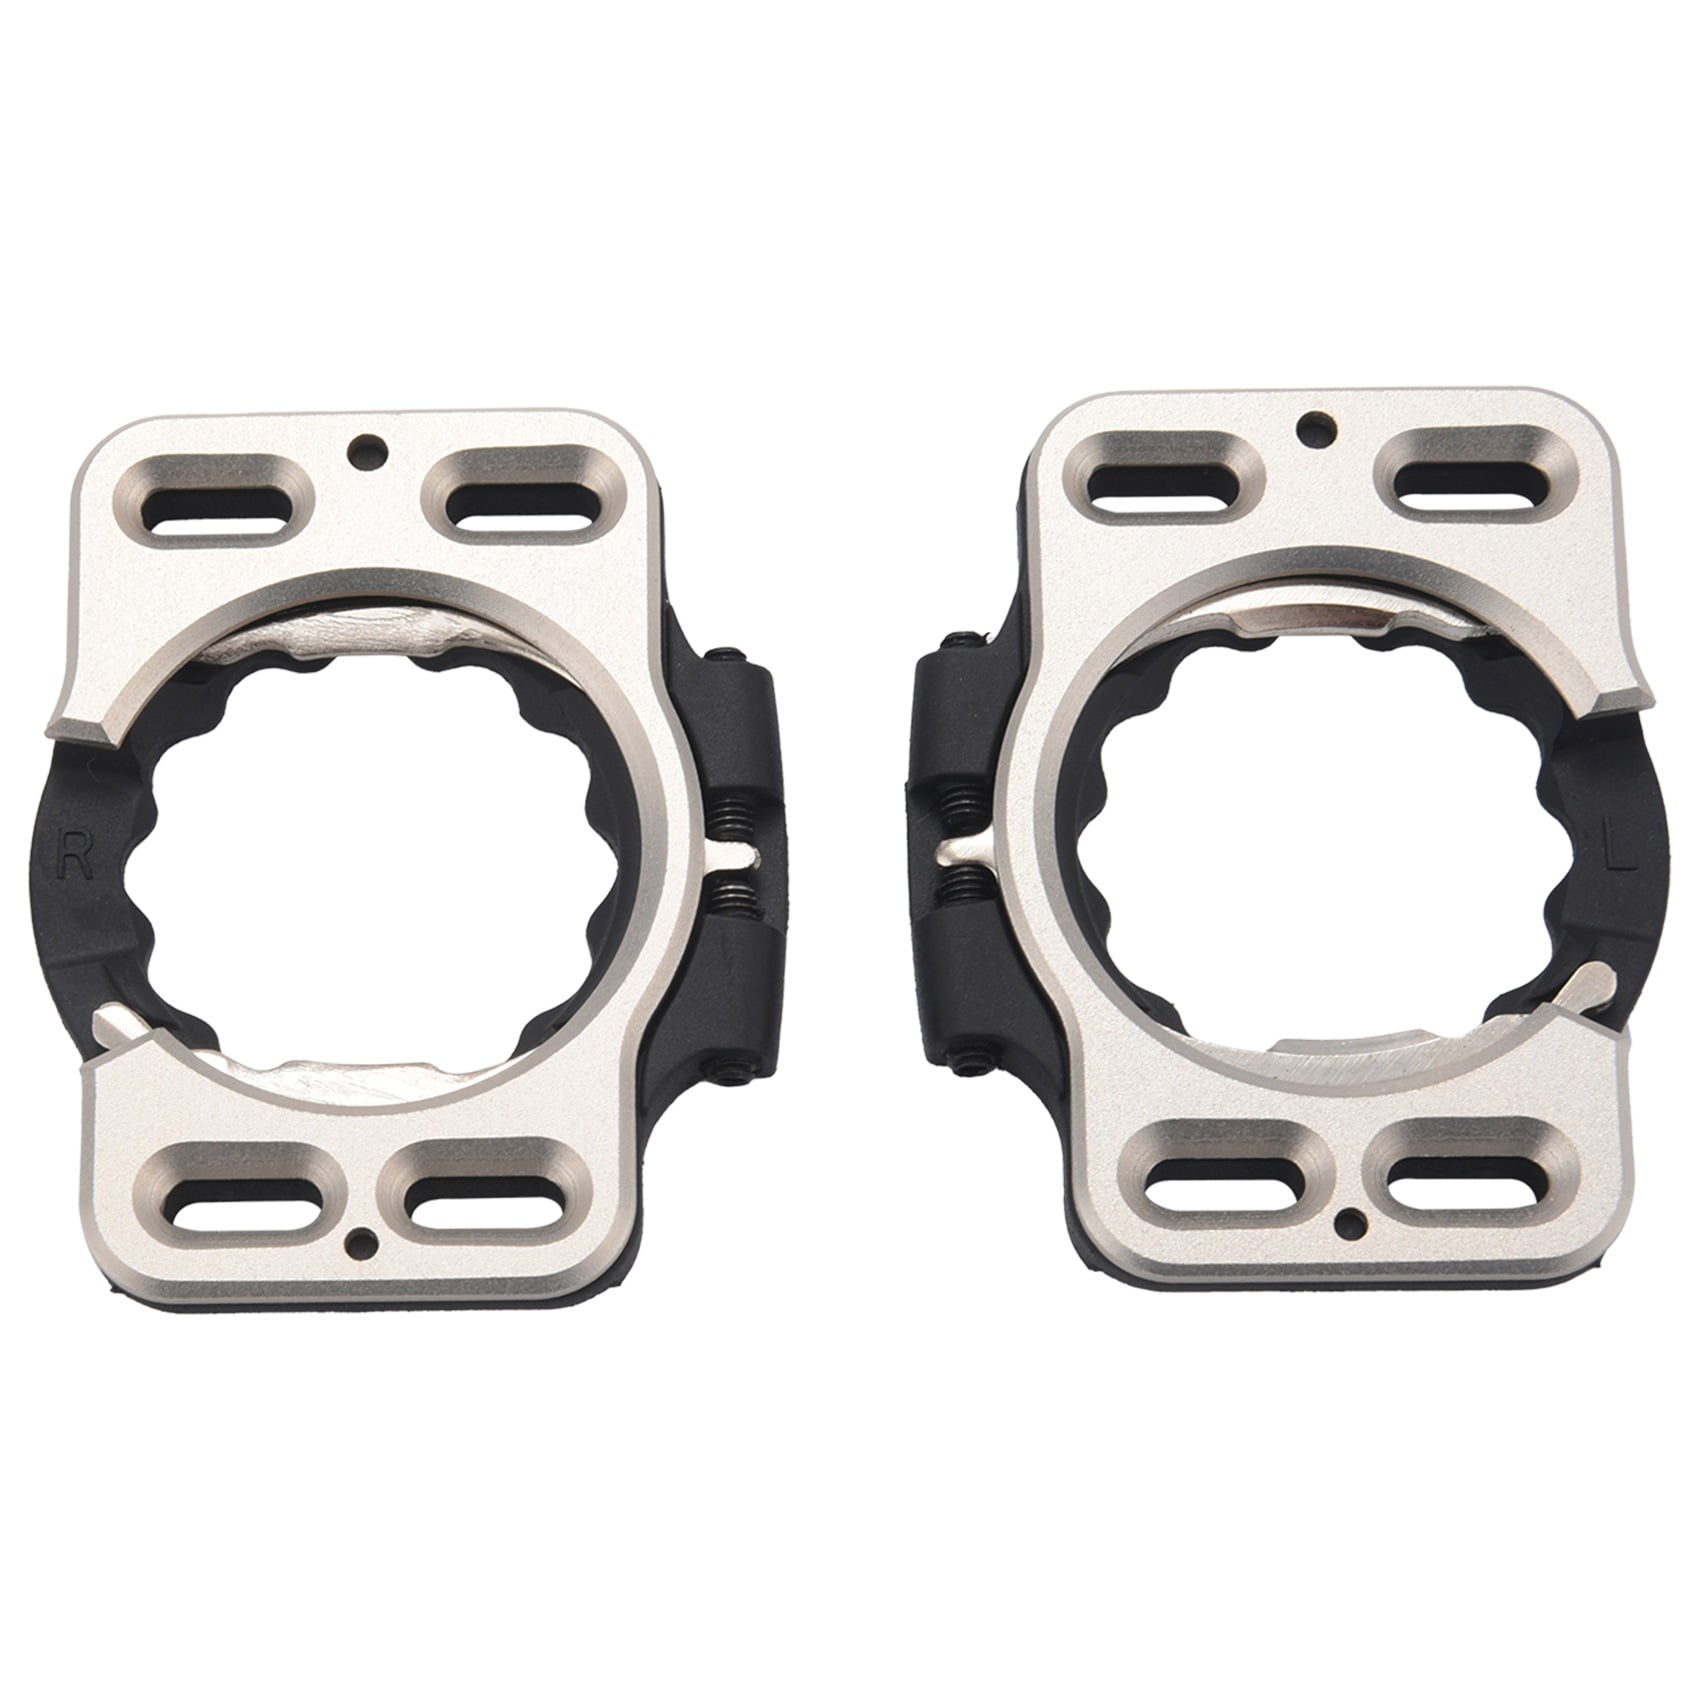 1 Pair Quick Release Parts Aluminum Alloy Cleat Cover Lightweight Pedal Clip Riding Durable Road For Speedplay Zero - Walmart.com